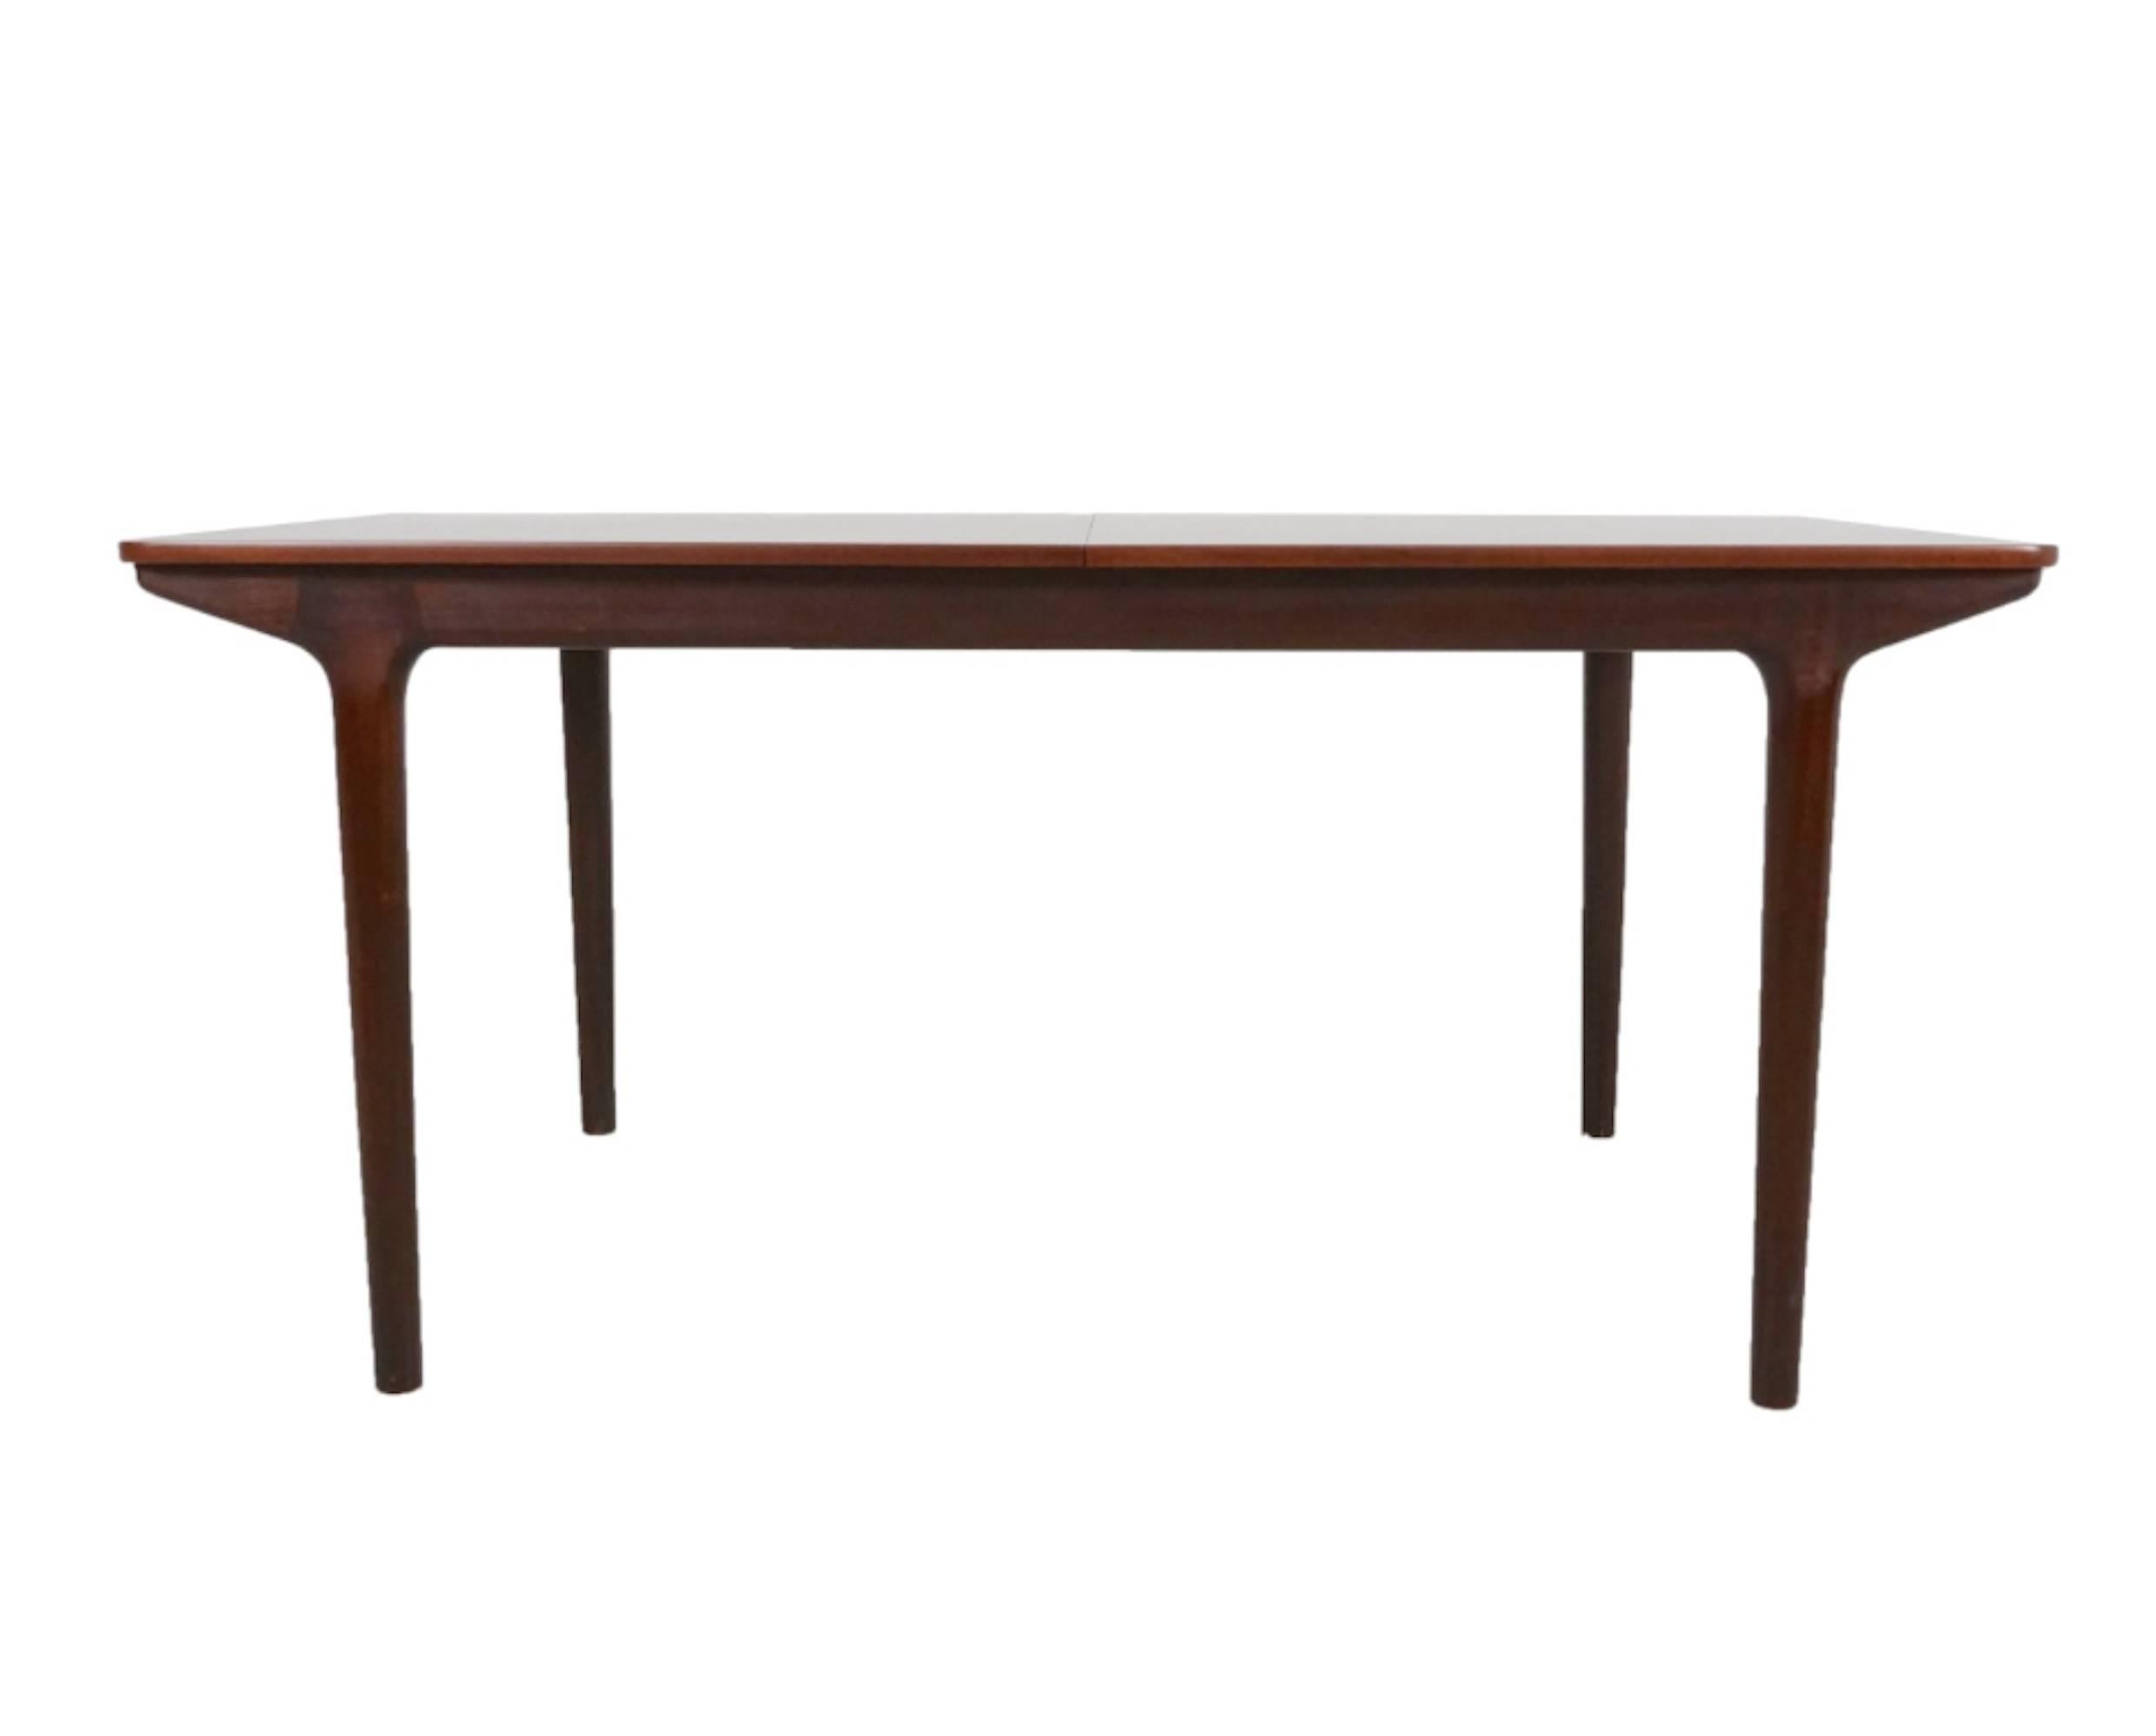 This table was designed by Tom Robertson for A.H. McIntosh of Kirkcaldy in Scotland and was in production during the 1960s and 1970s. The design features a firm and intelligent construction with two extension leaves that when extended, can seat up